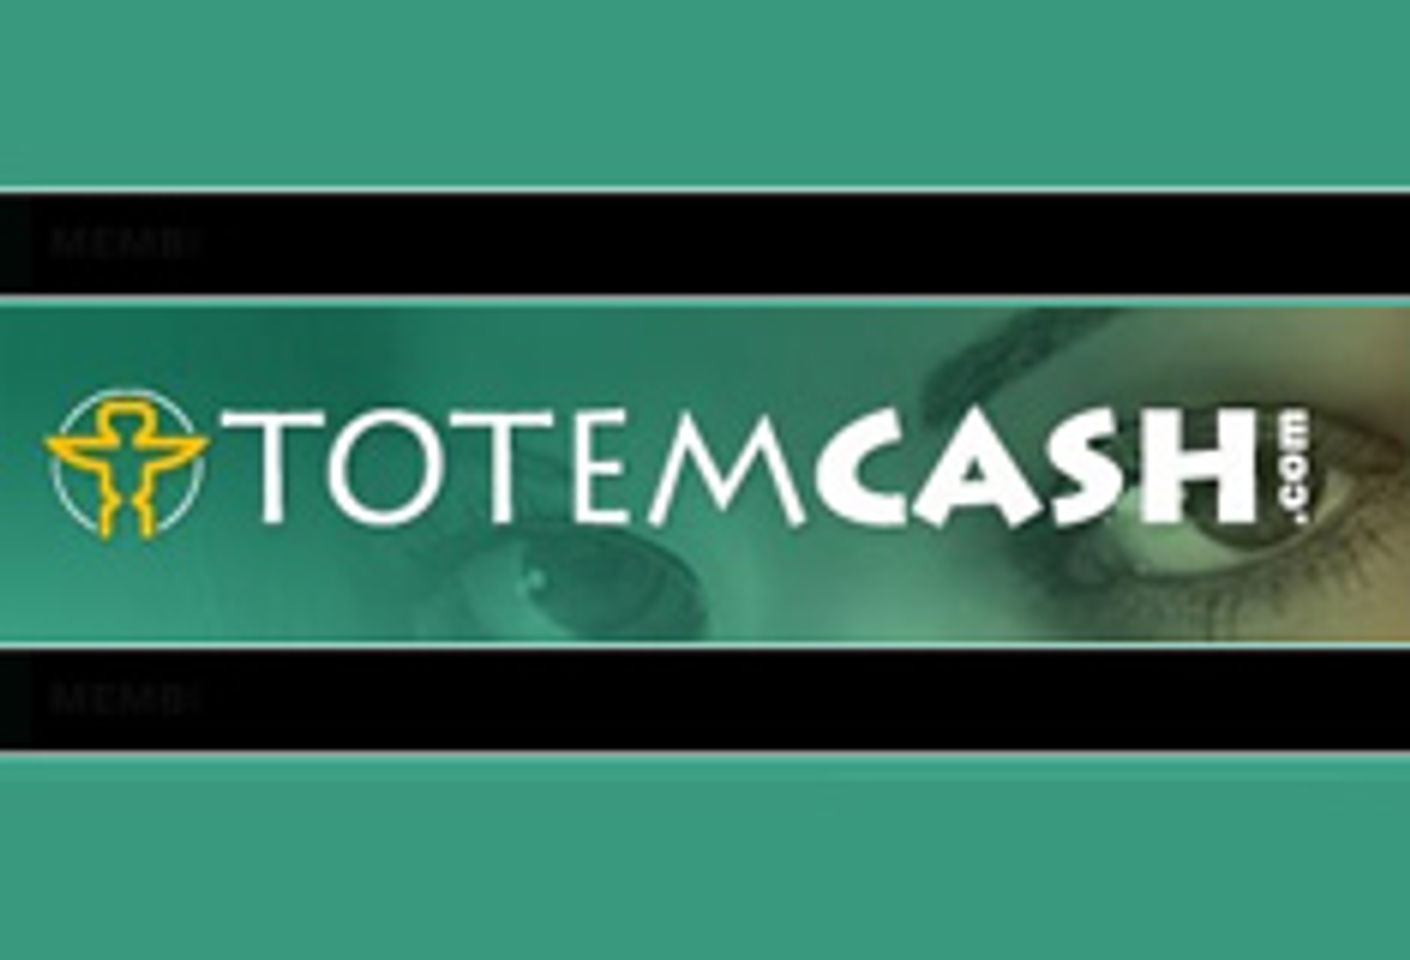 TotemCash Courts Webmasters with Full Disclosures